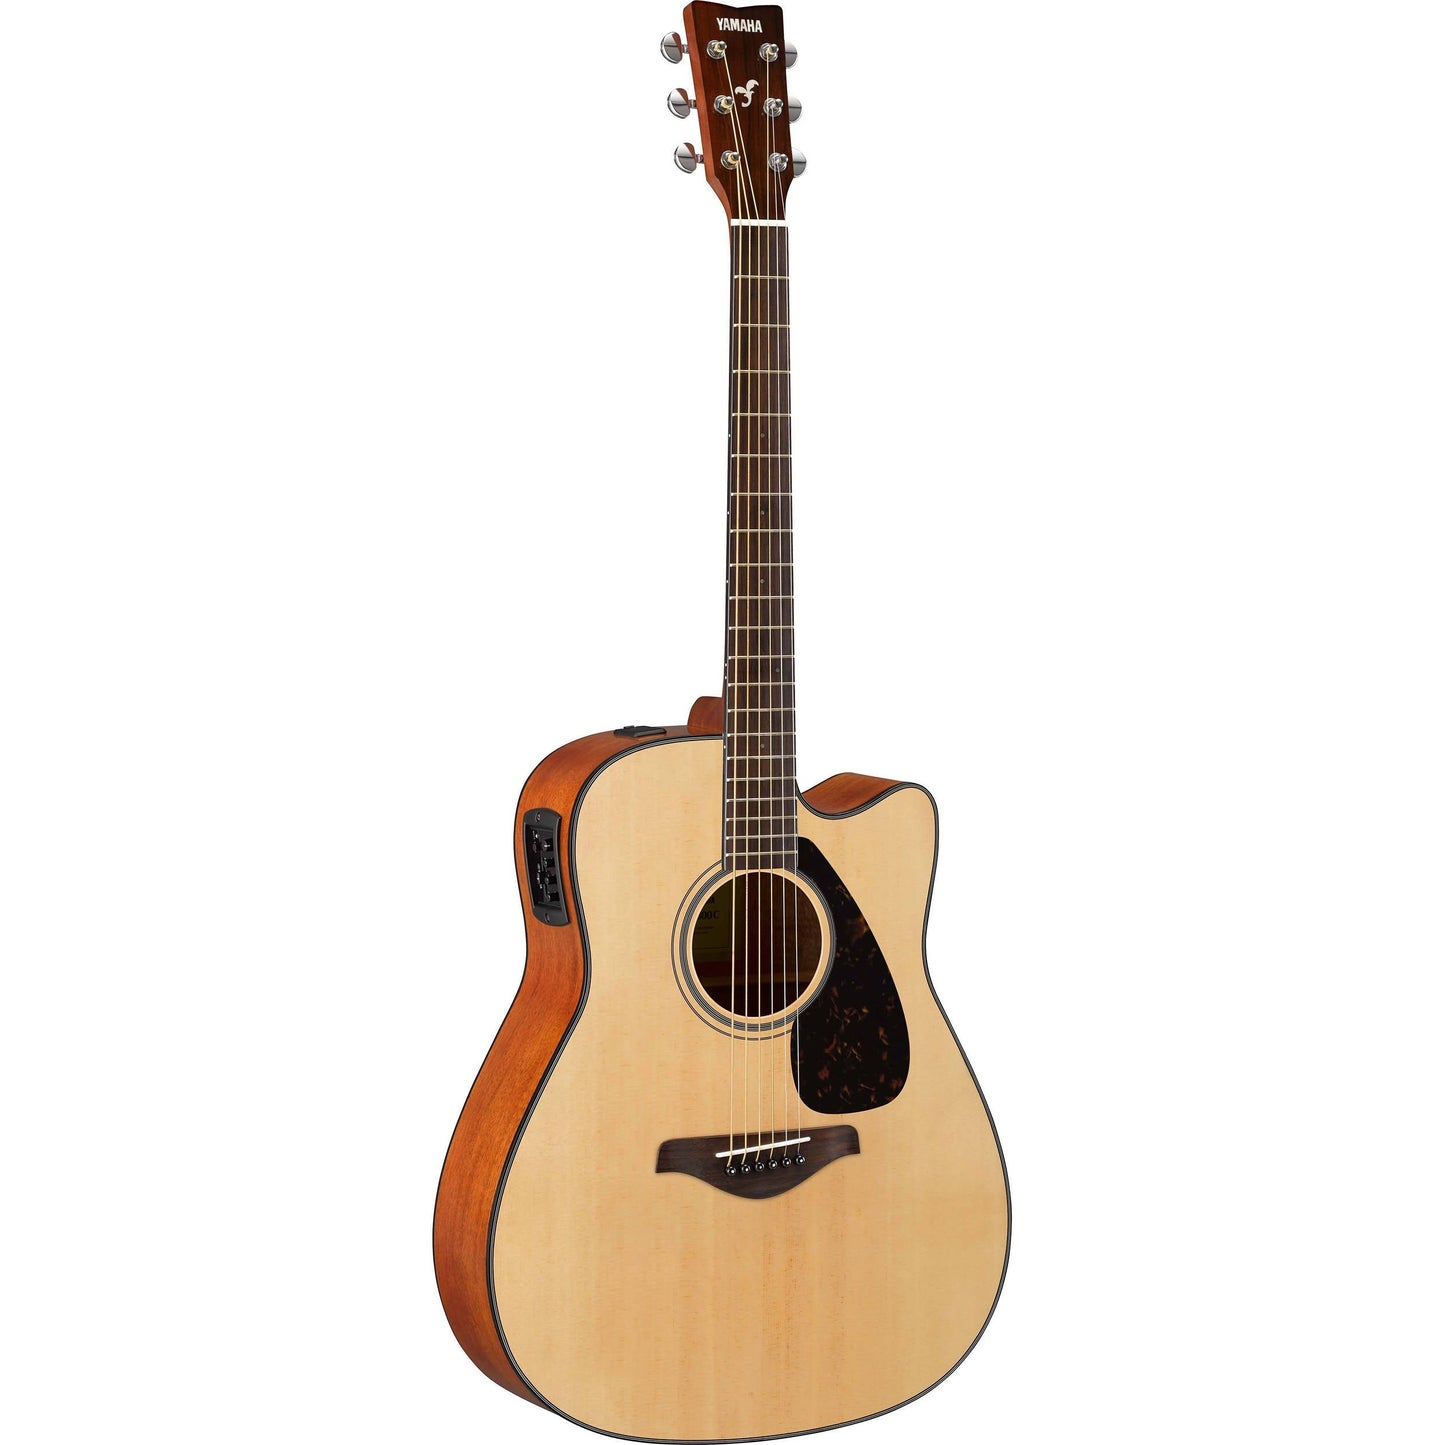 Yamaha FGX800C Solid Spruce Top Dreadnought Acoustic Guitar w/ Electronics - Sand Burst